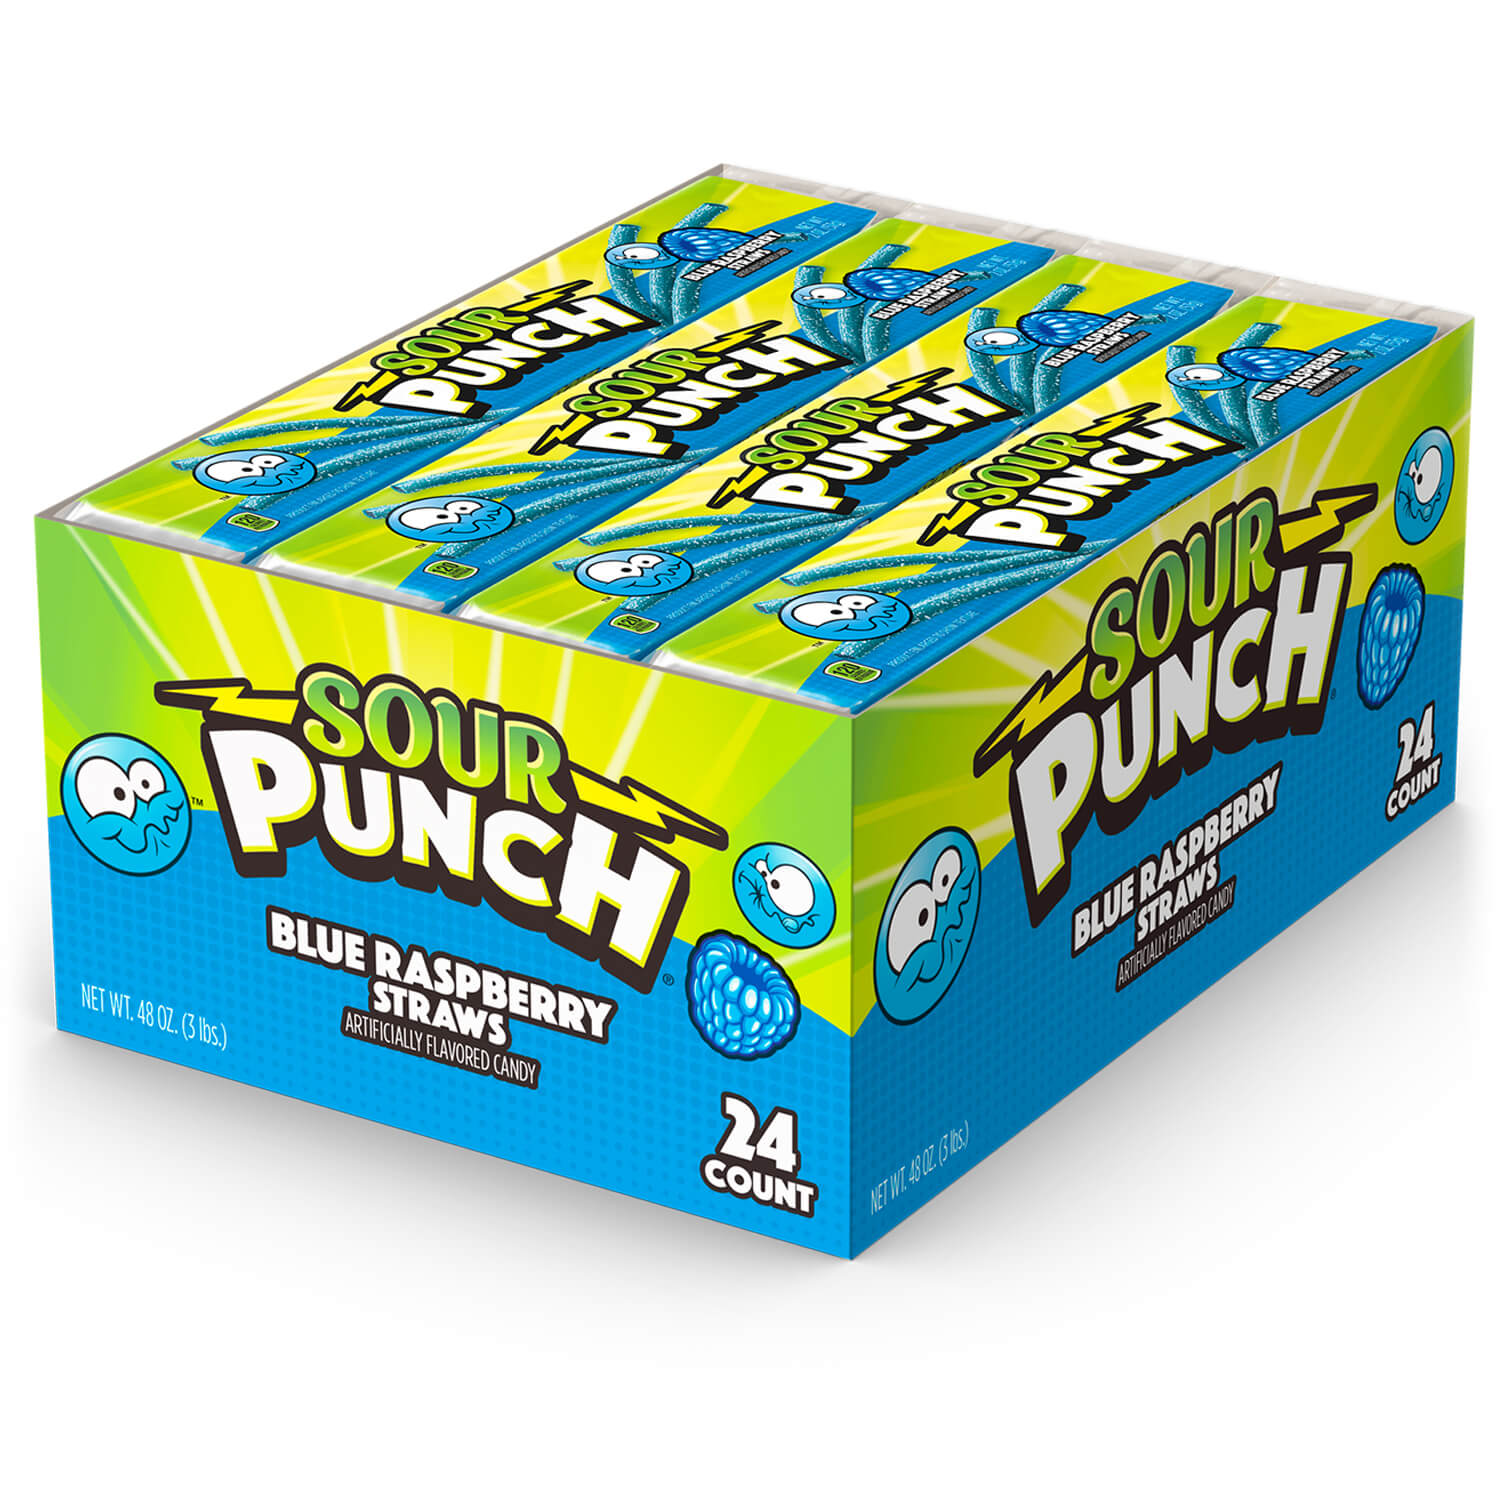 Sour Punch Blue Raspberry Straws 24 Pack 2oz Bags